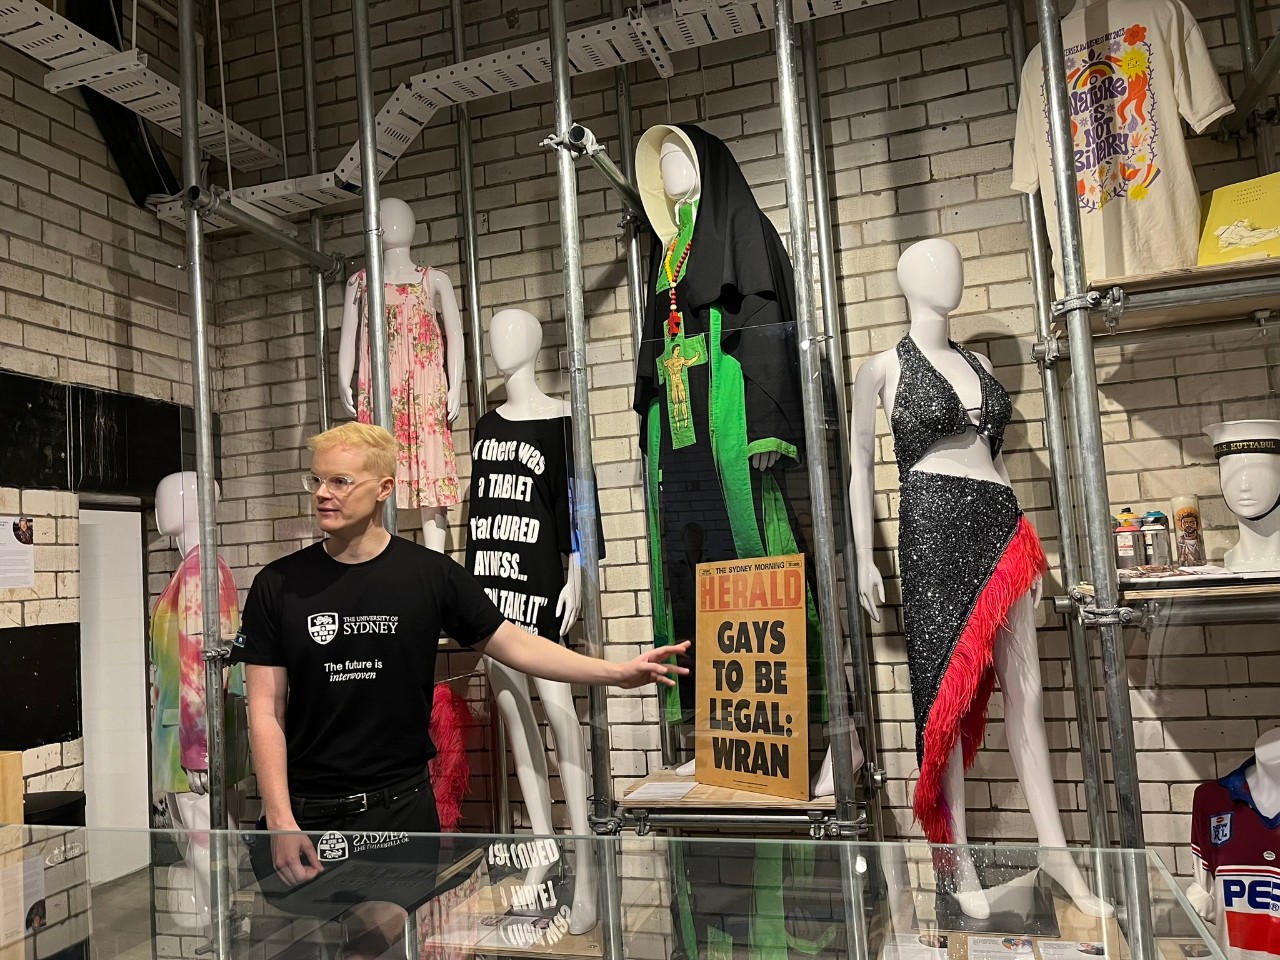 A photograph showing a white man with blonde hair and glasses, wearing a black tshirt with the University of Sydney logo, standing in front of an exhibition display. The display features a cover spread from an historical edition of the Sydney Morning Herald newspaper with the text "GAYS TO BE LEGAL: WRAN", and several mannequins wearing costumes of significance to the Sydney LGBTQIA+ community. These include a black t-shirt emblazened with white text reading "If there was a tablet that cured gayness... I wouldn't take it - Magda Szubanski", a costume similar to a Catholic nun's habit donated by protest and performance art group the Sisters of Perpetual Indulgence, and a sequinned costume worn by drag queen Courtney Act.